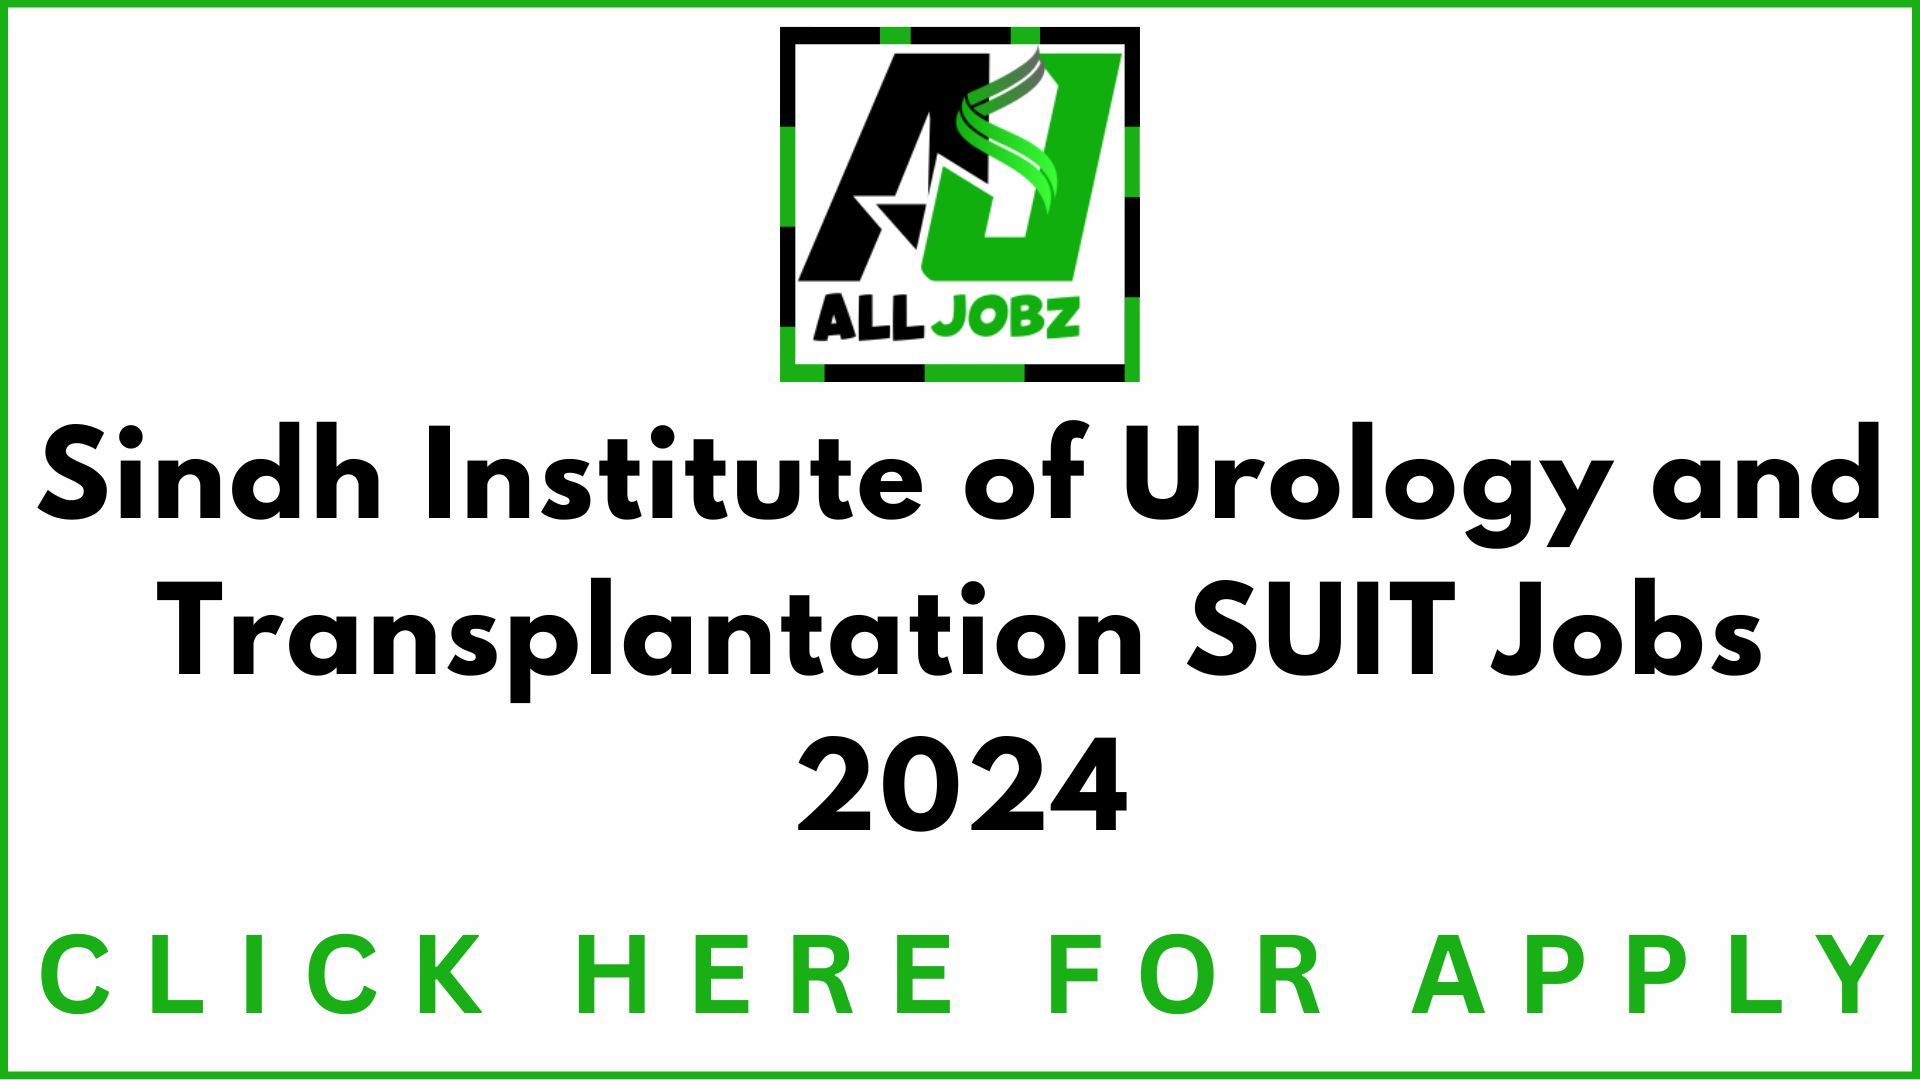 Sindh Institute Of Urology And Transplantation Suit Healthcare Jobs 2024, Apply Now For Exciting Career Opportunities In Suit Healthcare Pakistan, Siut Nawabshah Jobs 2024, Siut Jobs 2024 Salary, Suit Healthcare Jobs Salary, Suit Healthcare Jobs In Pakistan, Suit Healthcare Jobs Karachi, Www.siut.org Jobs, Siut Jobs 2024, Siut Sukkur Jobs Online Apply,